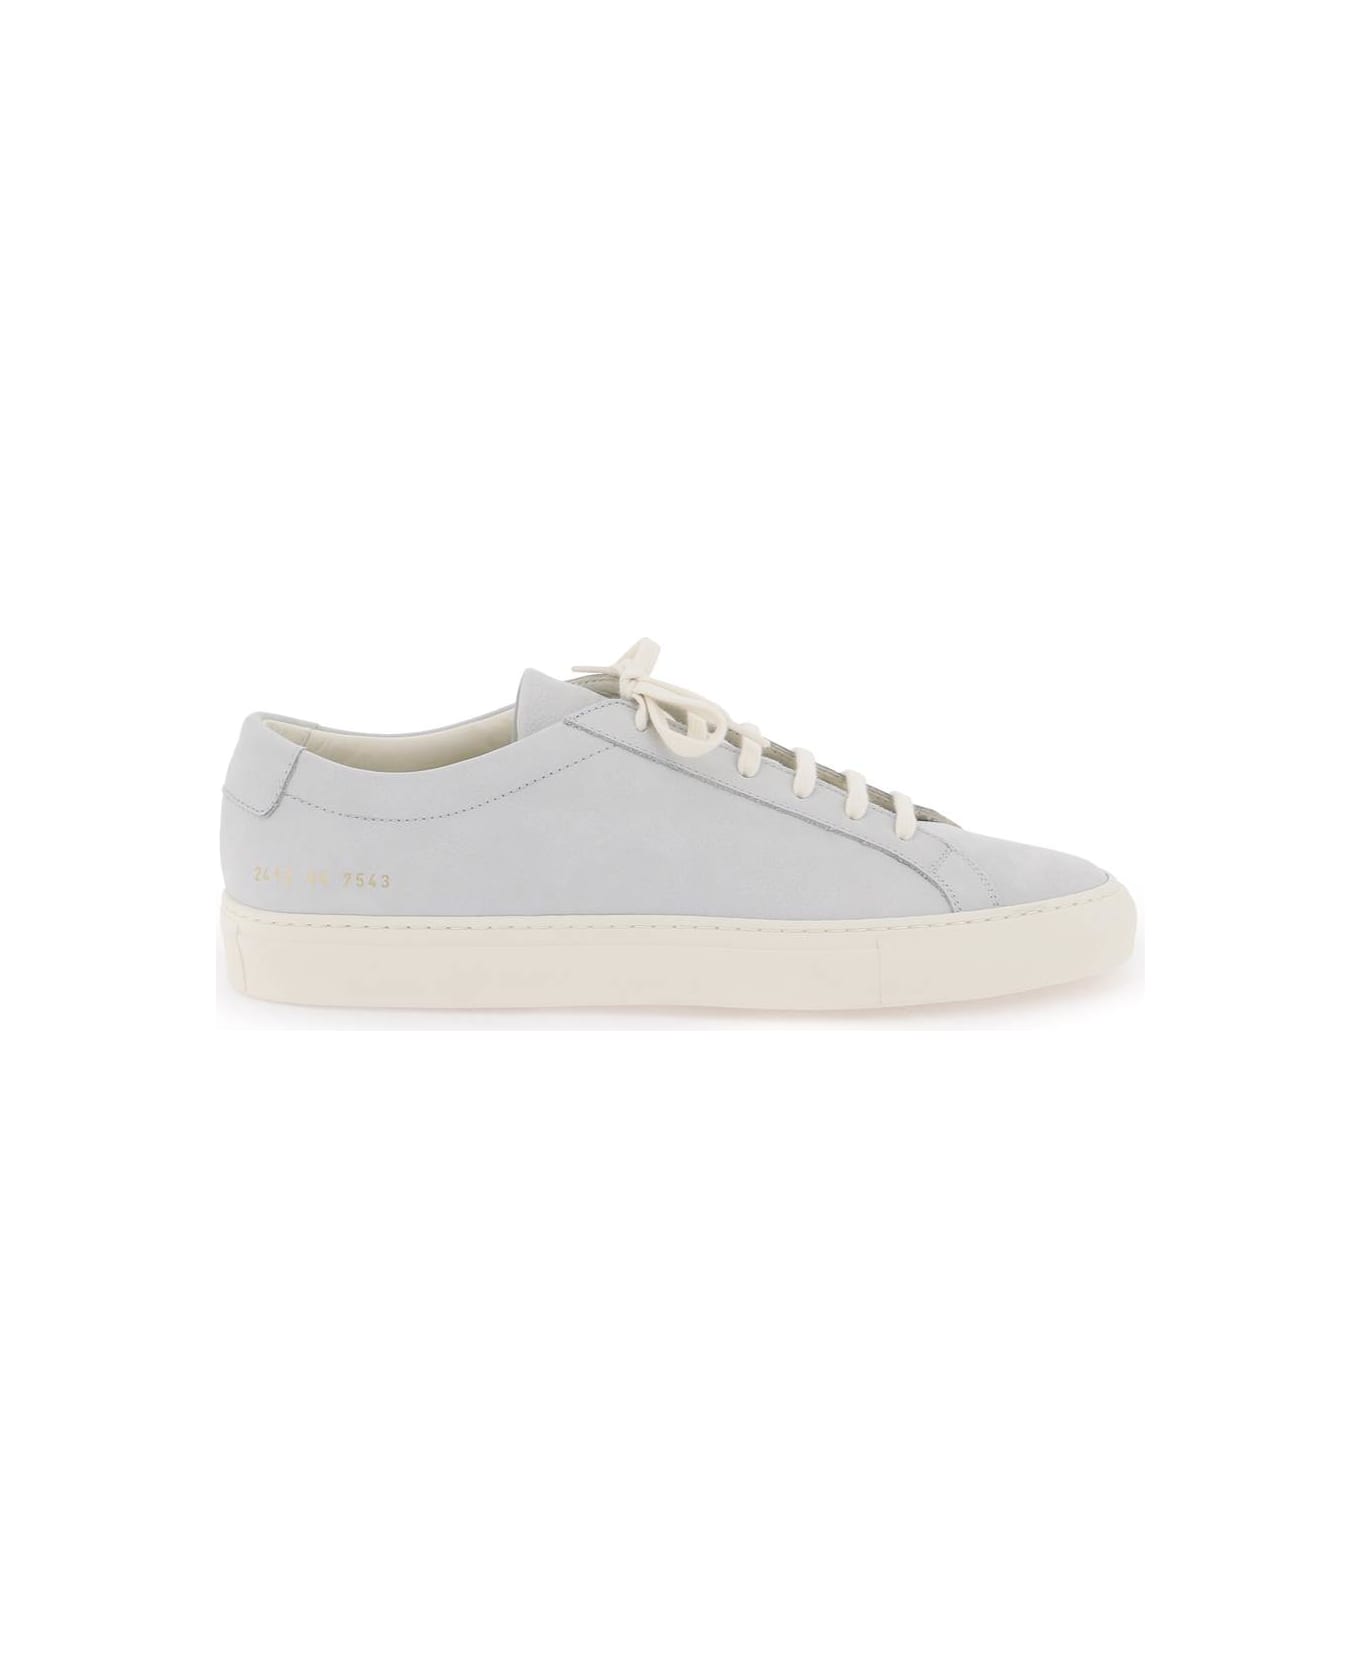 Common Projects Original Achilles Sneakers - GREY (Grey)